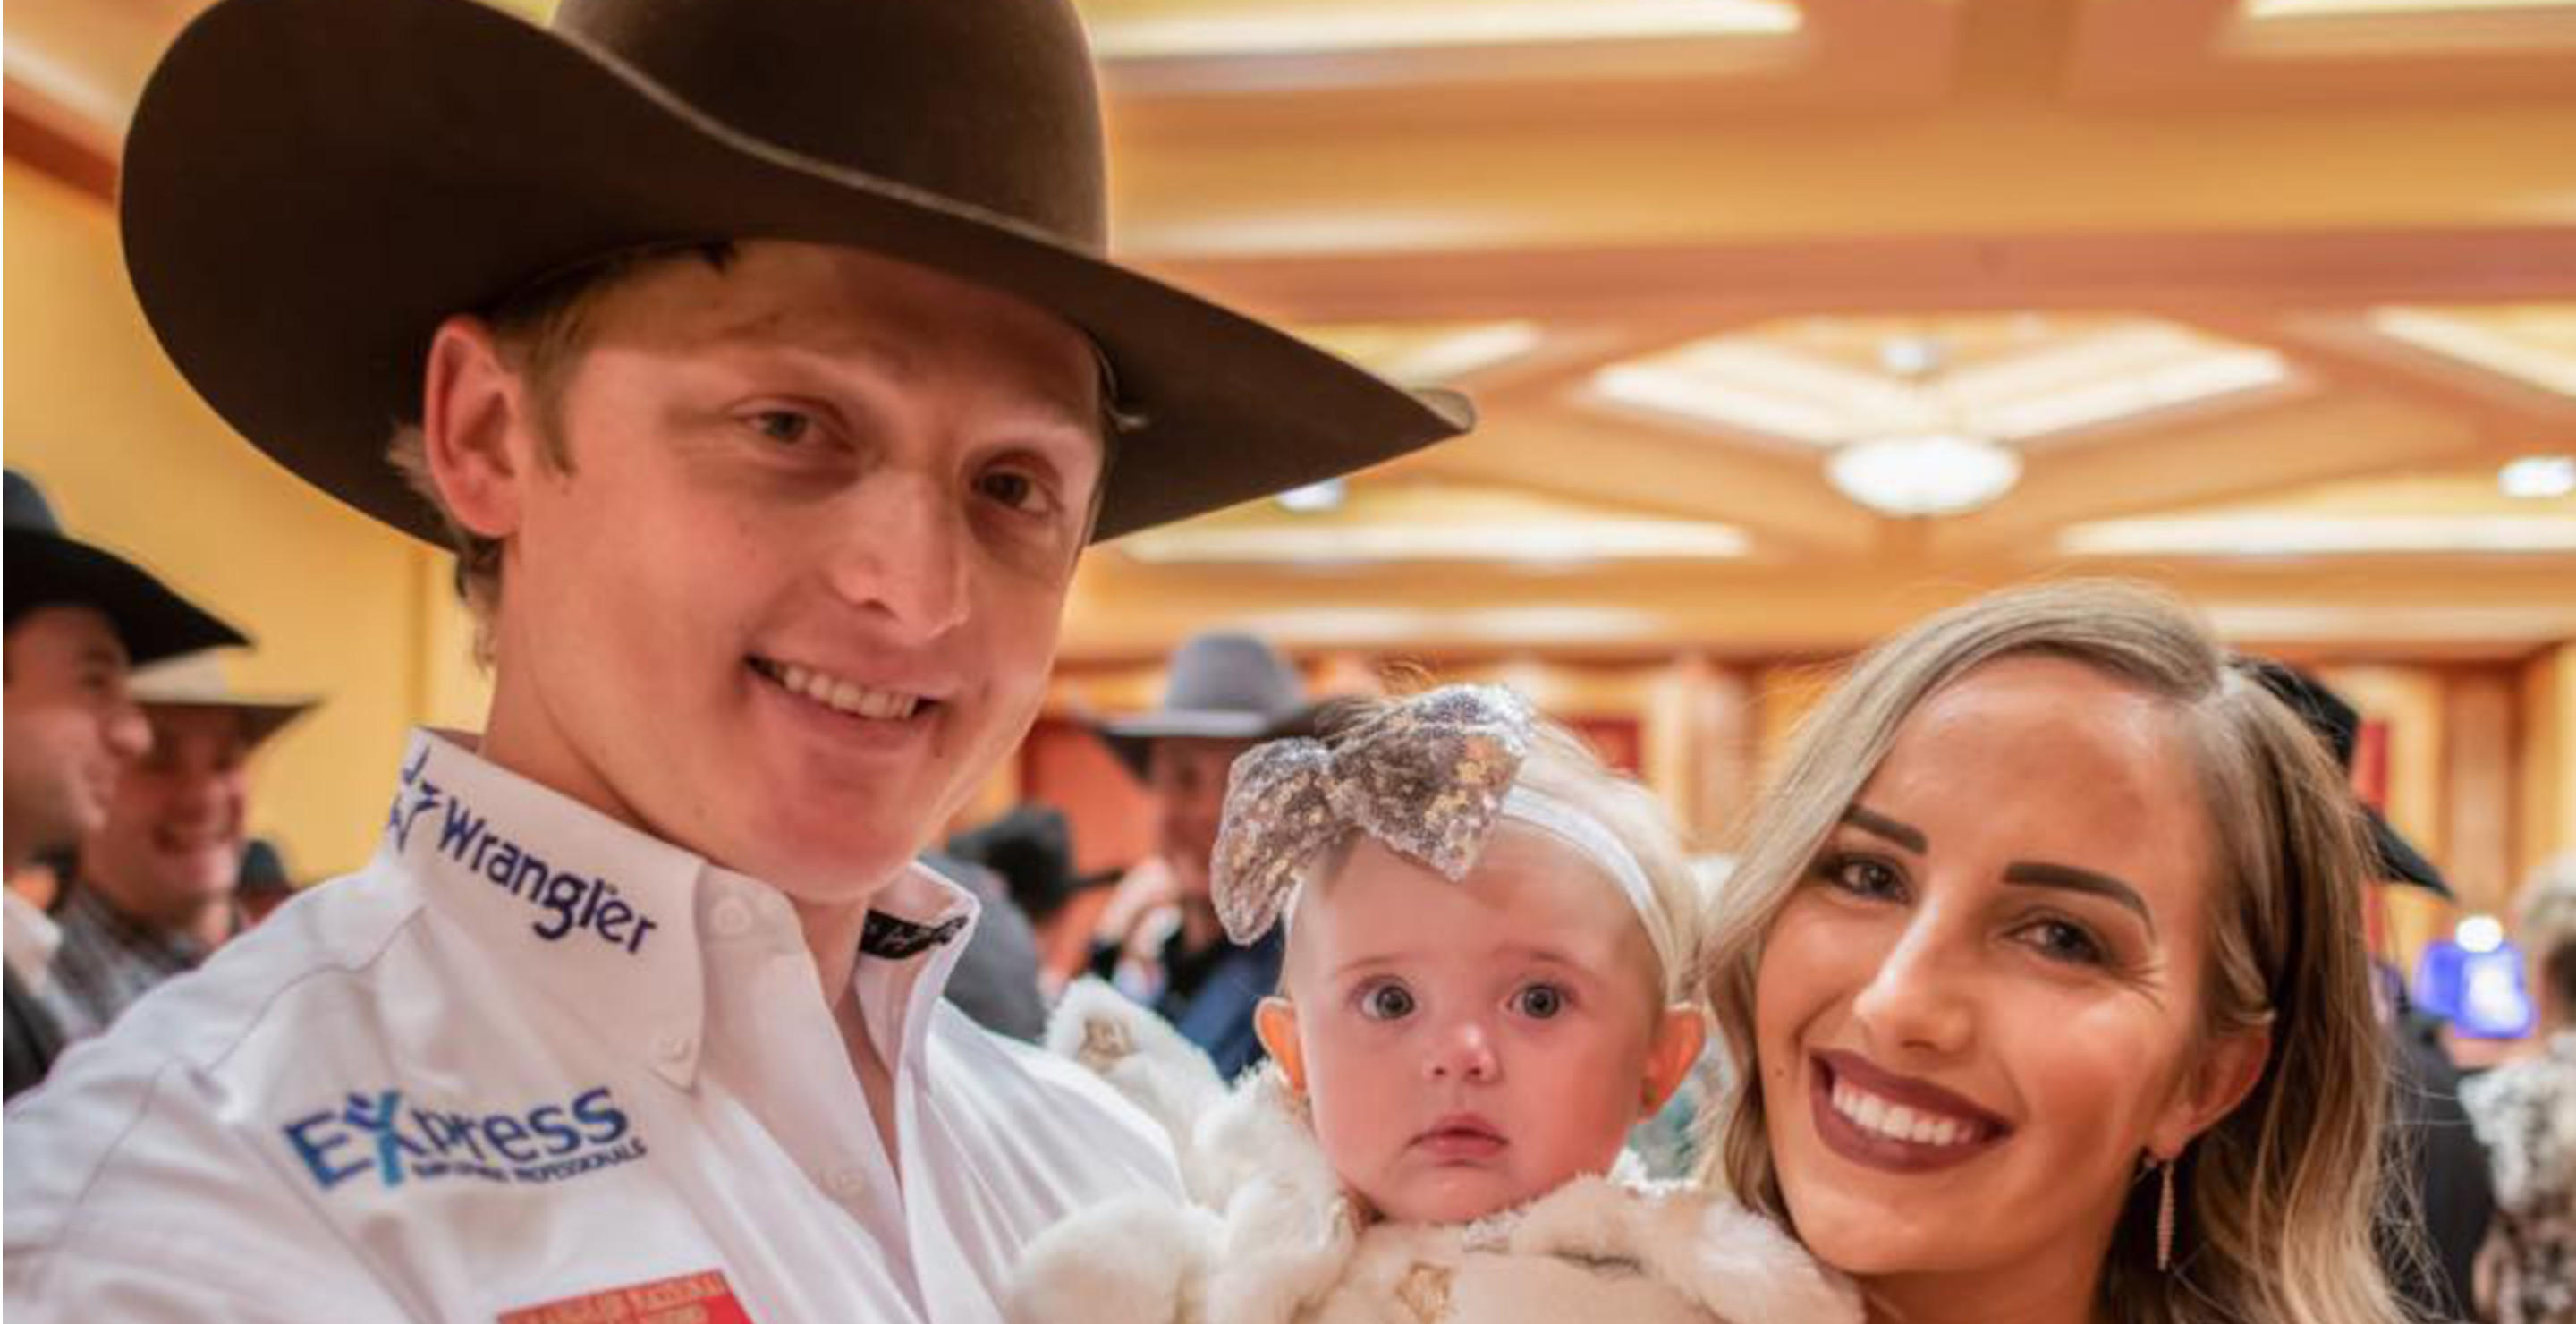 Rodeo Icon Spencer Wright's Wife Shares Devastating Image After 3-Year-Old Declared Brain Dead